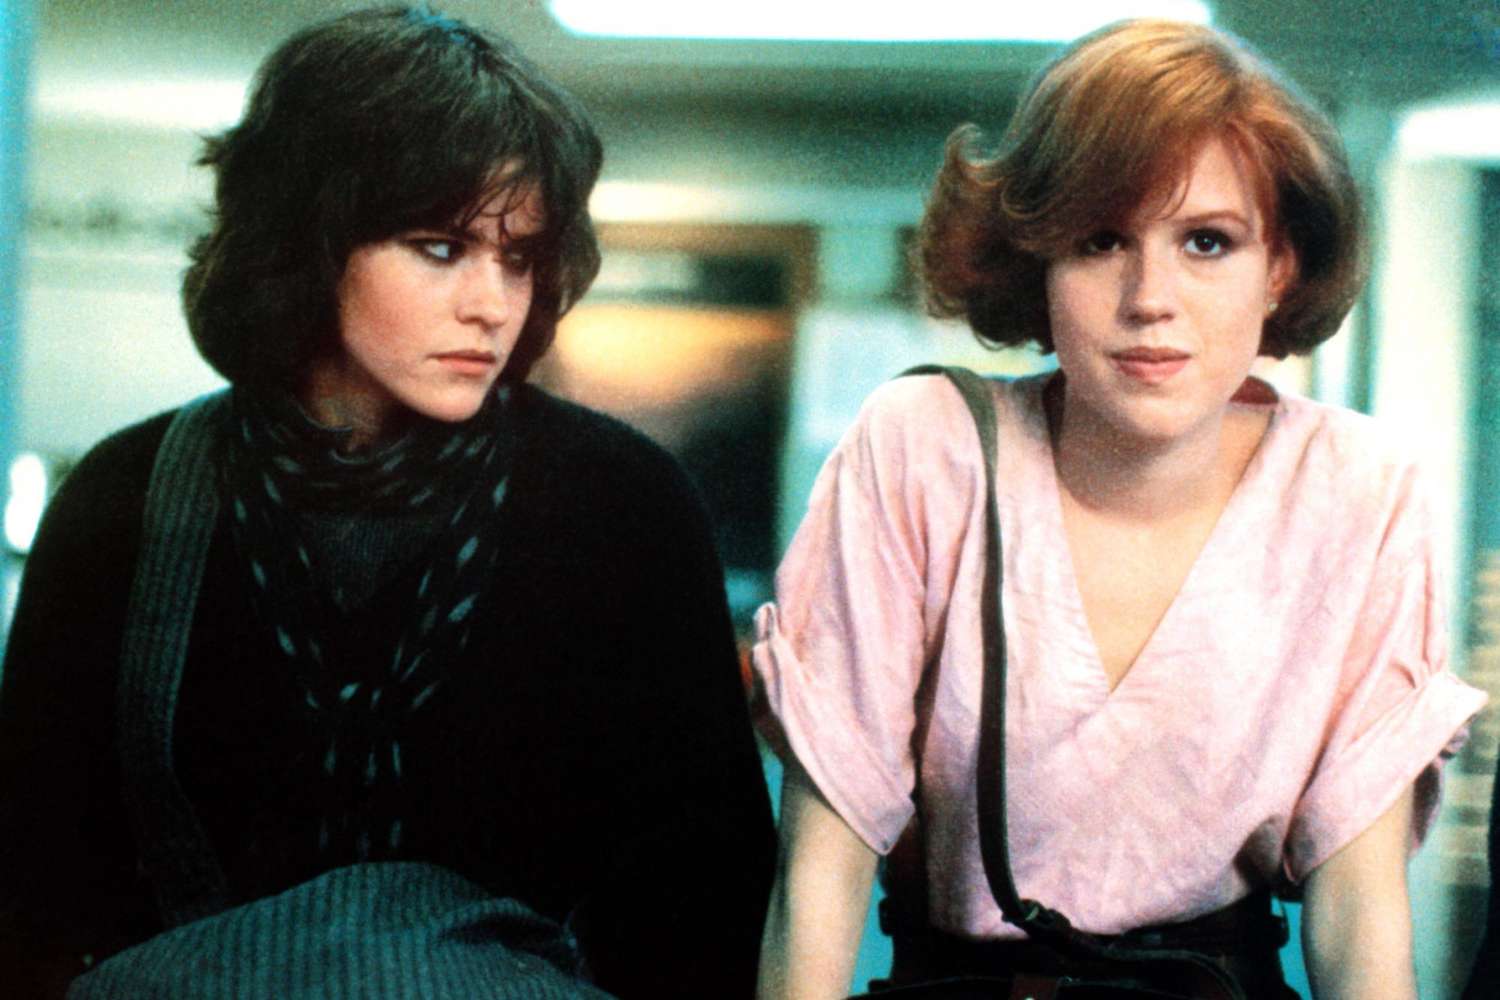 BEST: Allison Reynolds (Ally Sheedy) and Claire Standish (Molly Ringwald) in The Breakfast Club